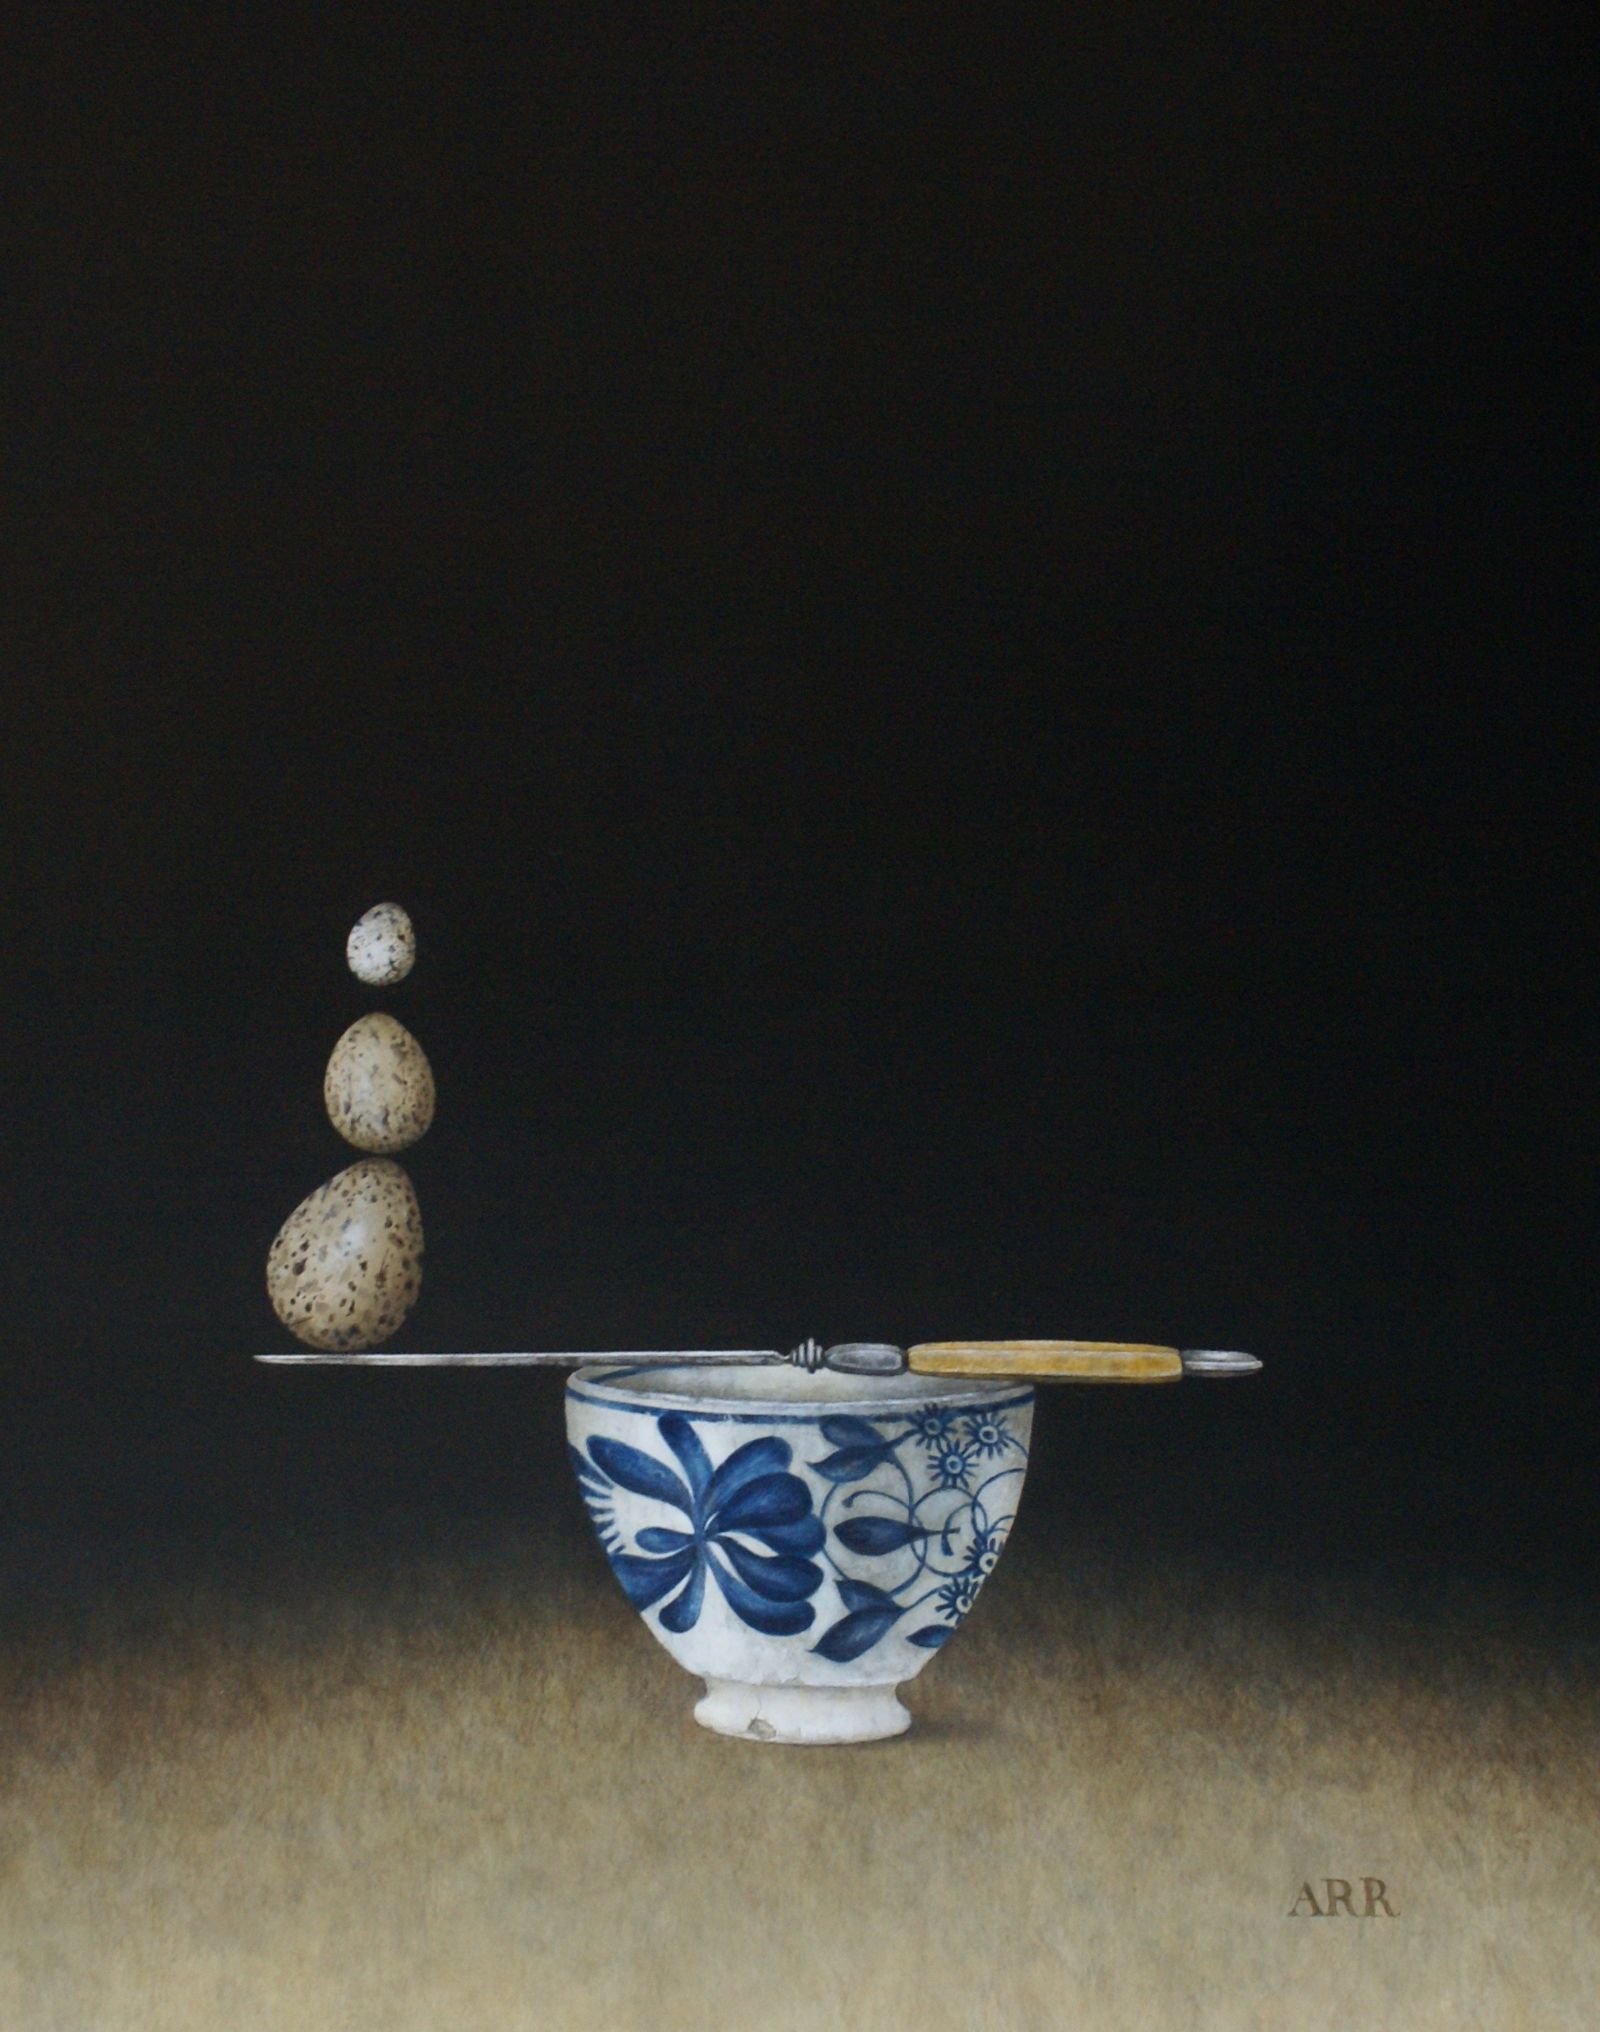 Blue Bowl with Knife and Balancing Eggs by Alison Rankin